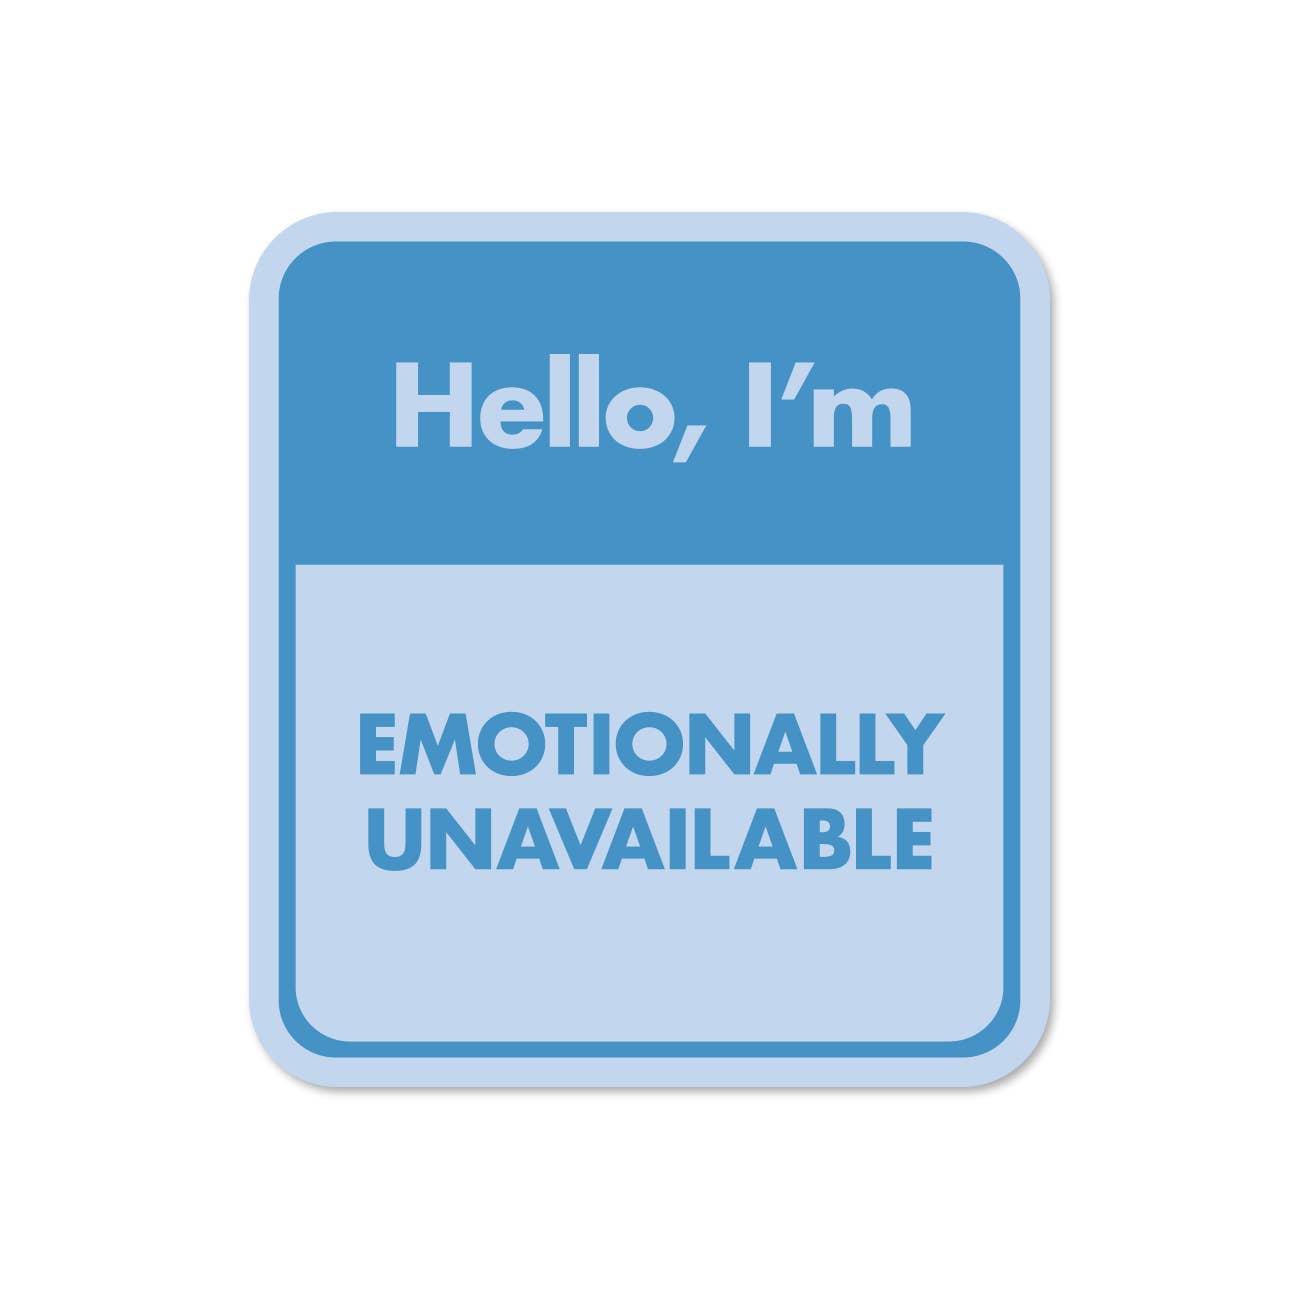 Pretty Alright Goods - Emotionally Unavailable Sticker